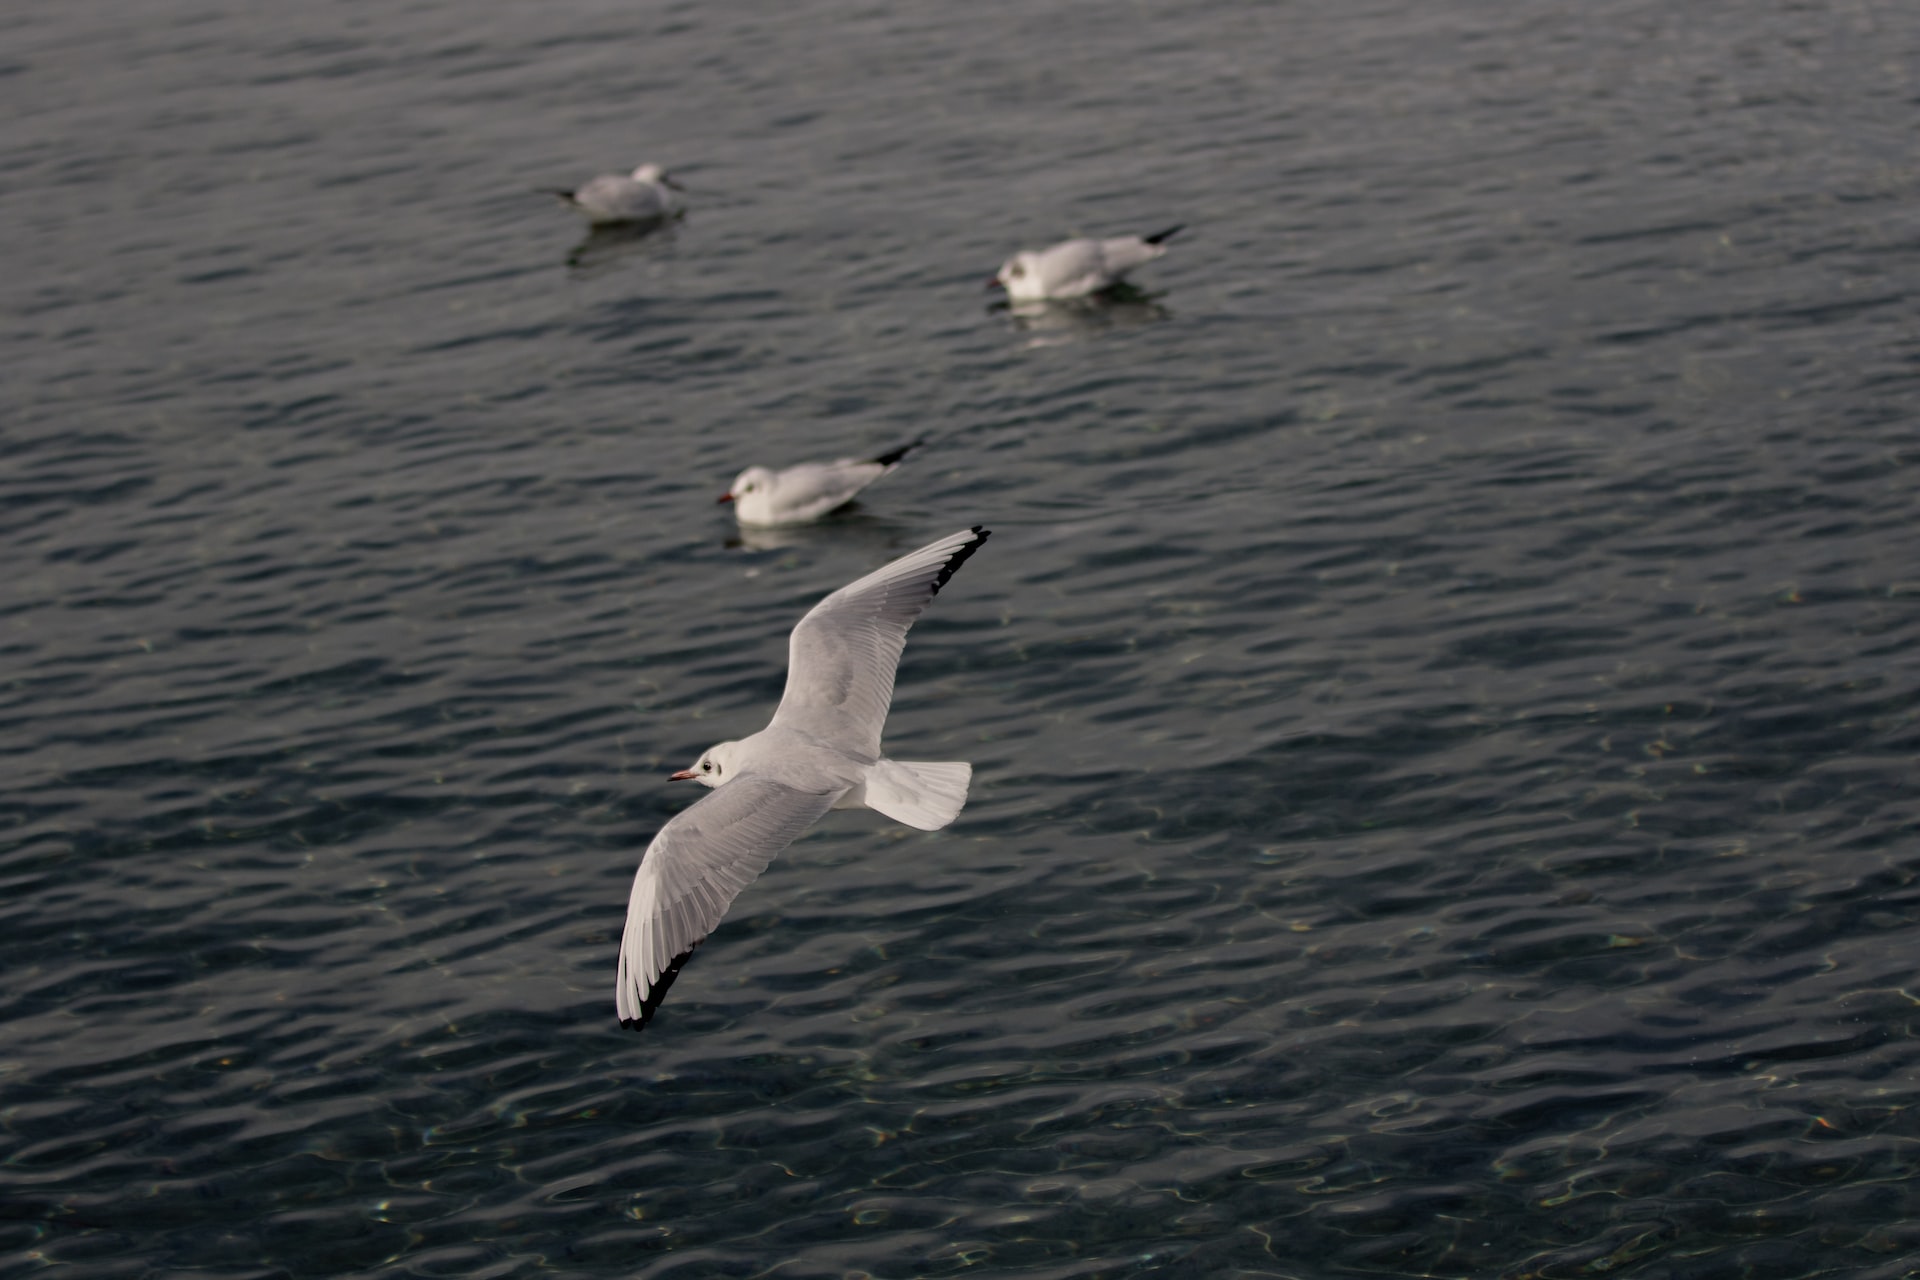 A seabird hovering in the air above the sea with three others sitting on the sea